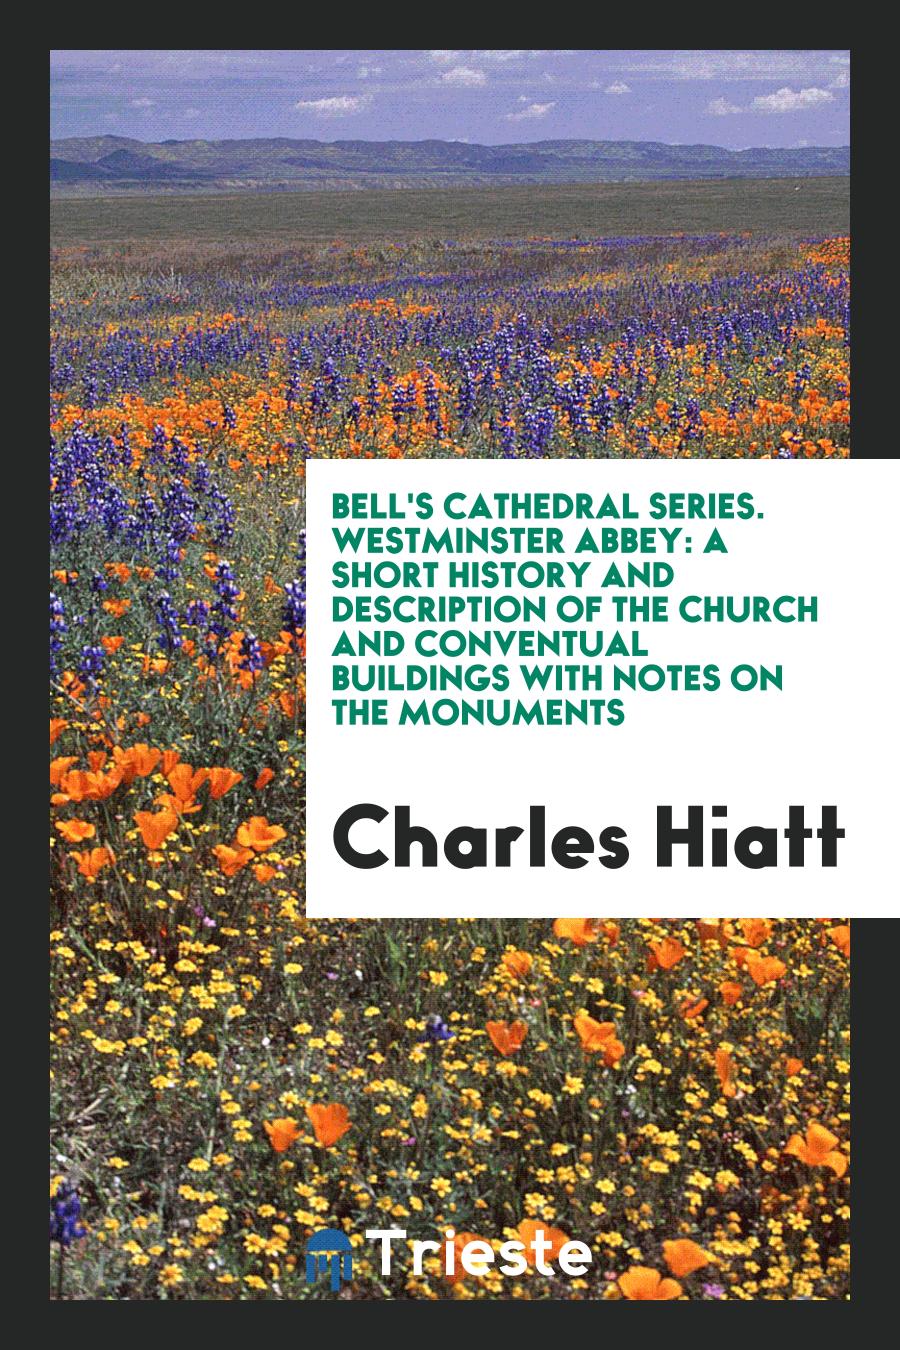 Bell's Cathedral Series. Westminster Abbey: A Short History and Description of the Church and Conventual Buildings with Notes on the Monuments